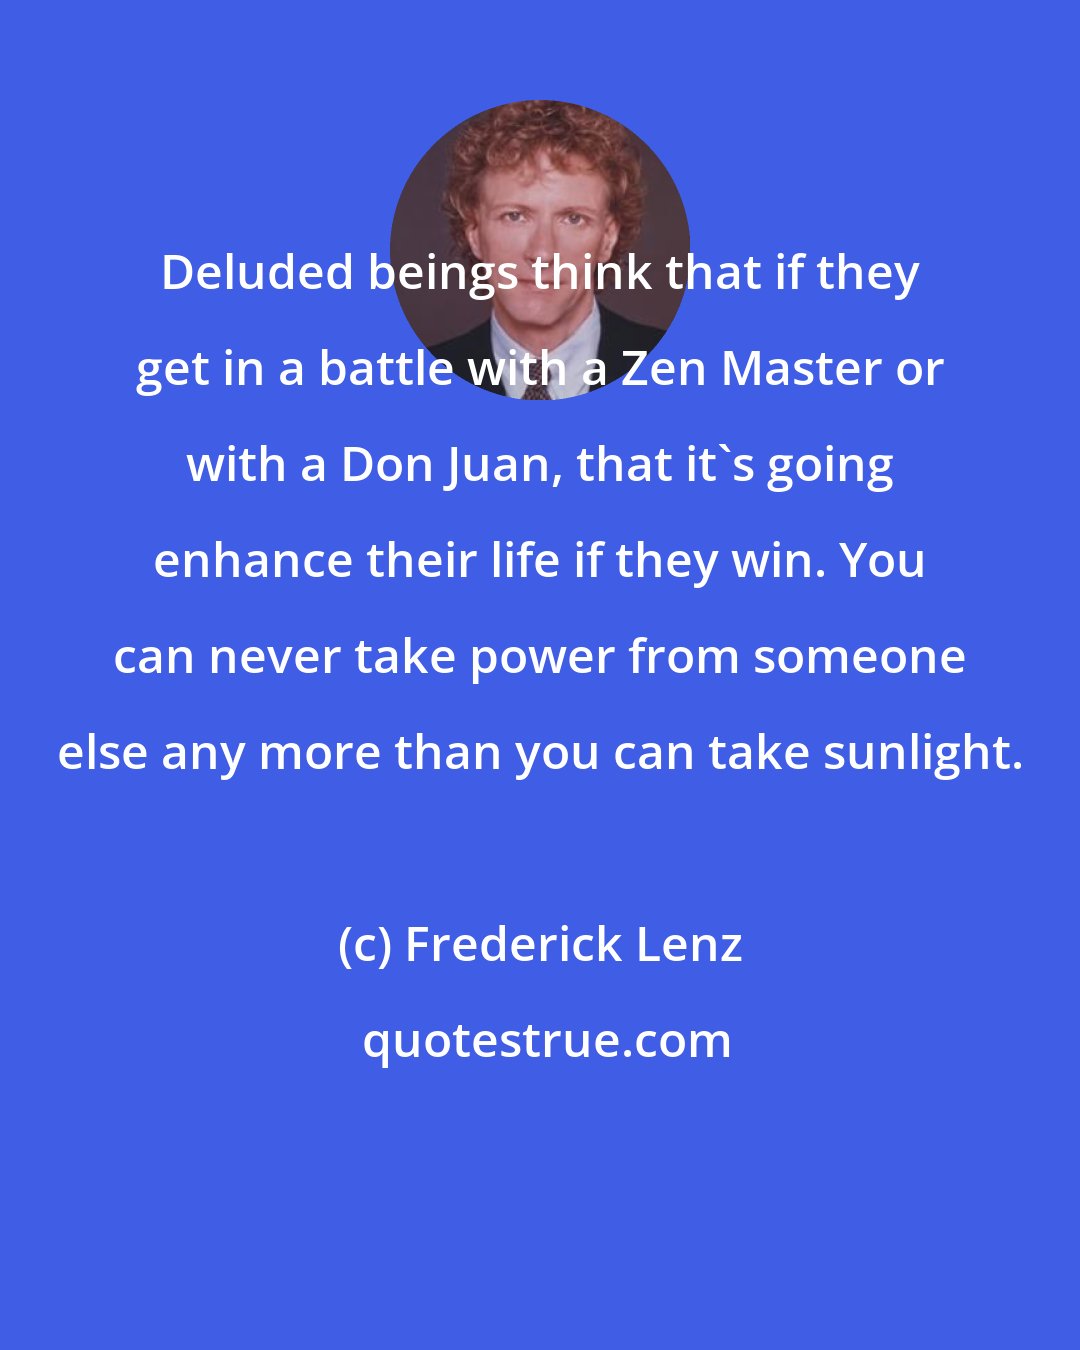 Frederick Lenz: Deluded beings think that if they get in a battle with a Zen Master or with a Don Juan, that it's going enhance their life if they win. You can never take power from someone else any more than you can take sunlight.